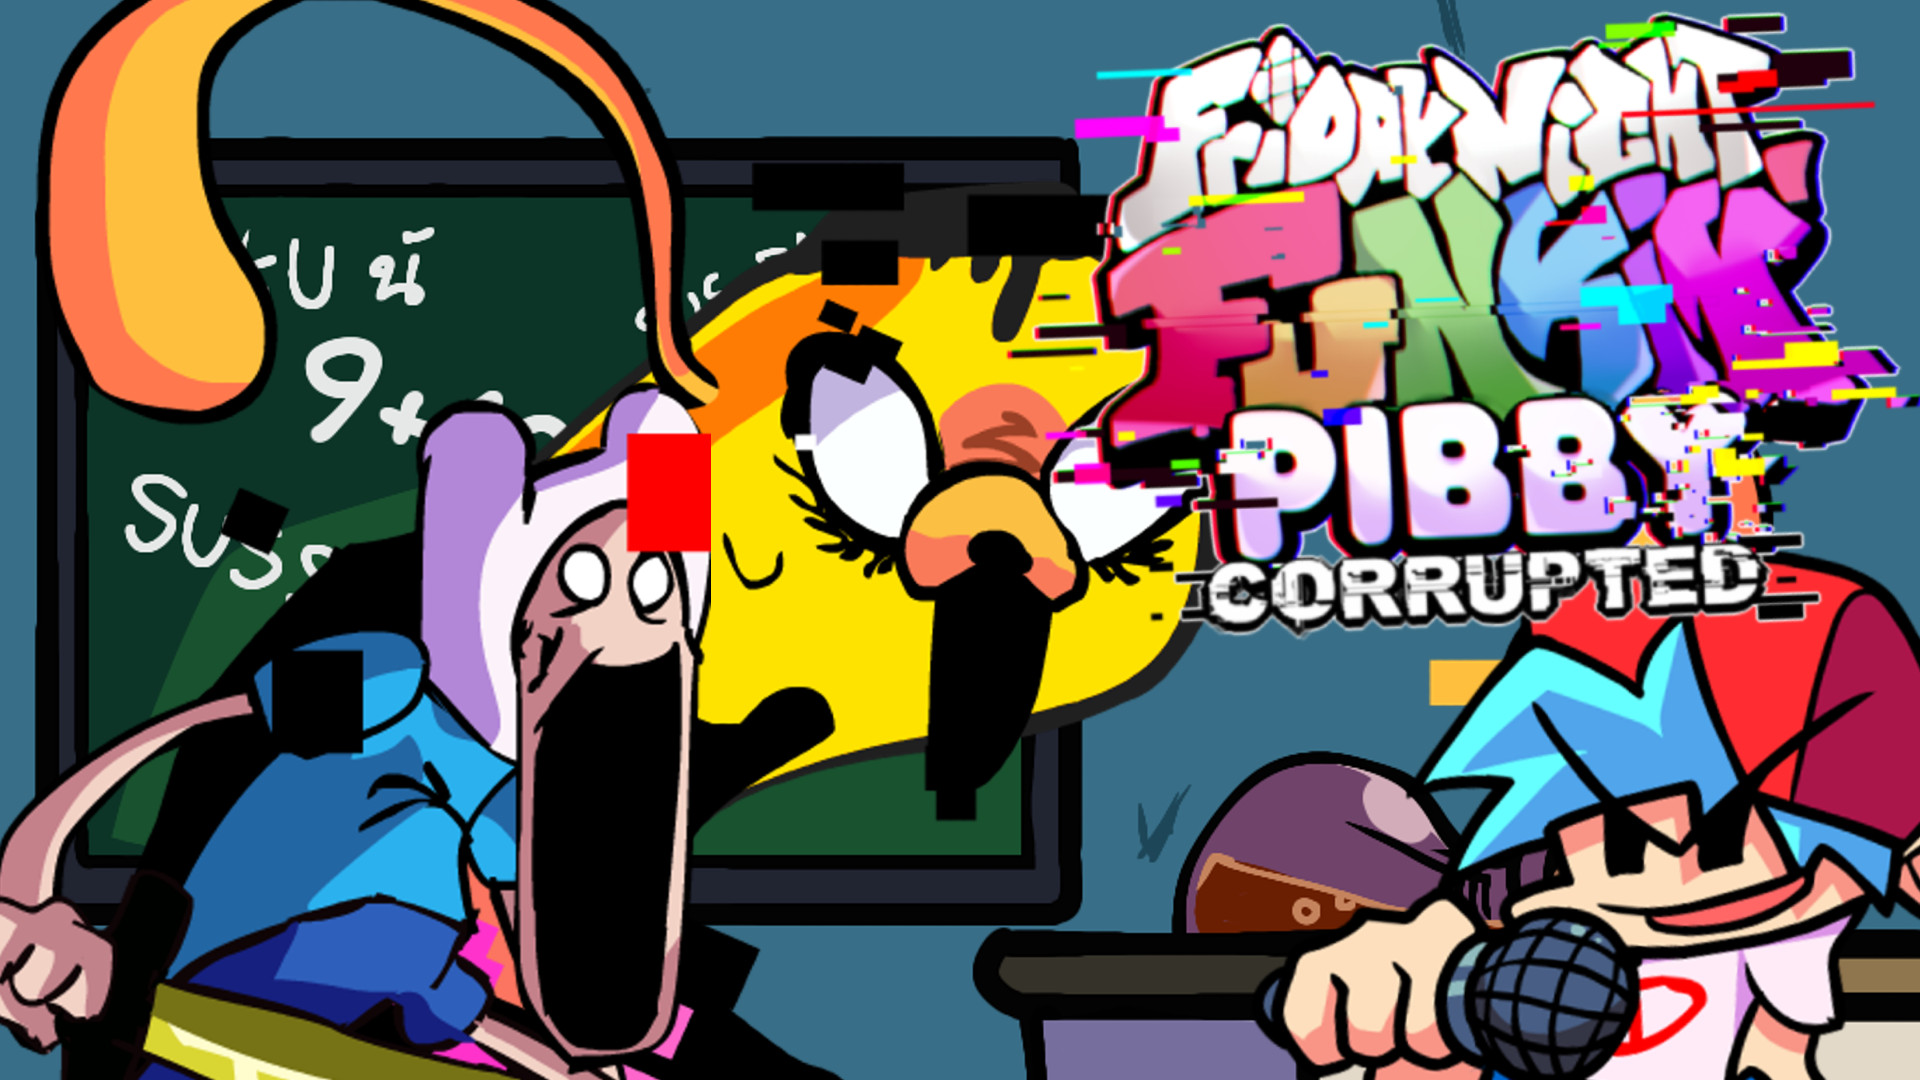 How To Draw FNF MOD Character - Corrupted Pibby Finn Easy Step by Step 